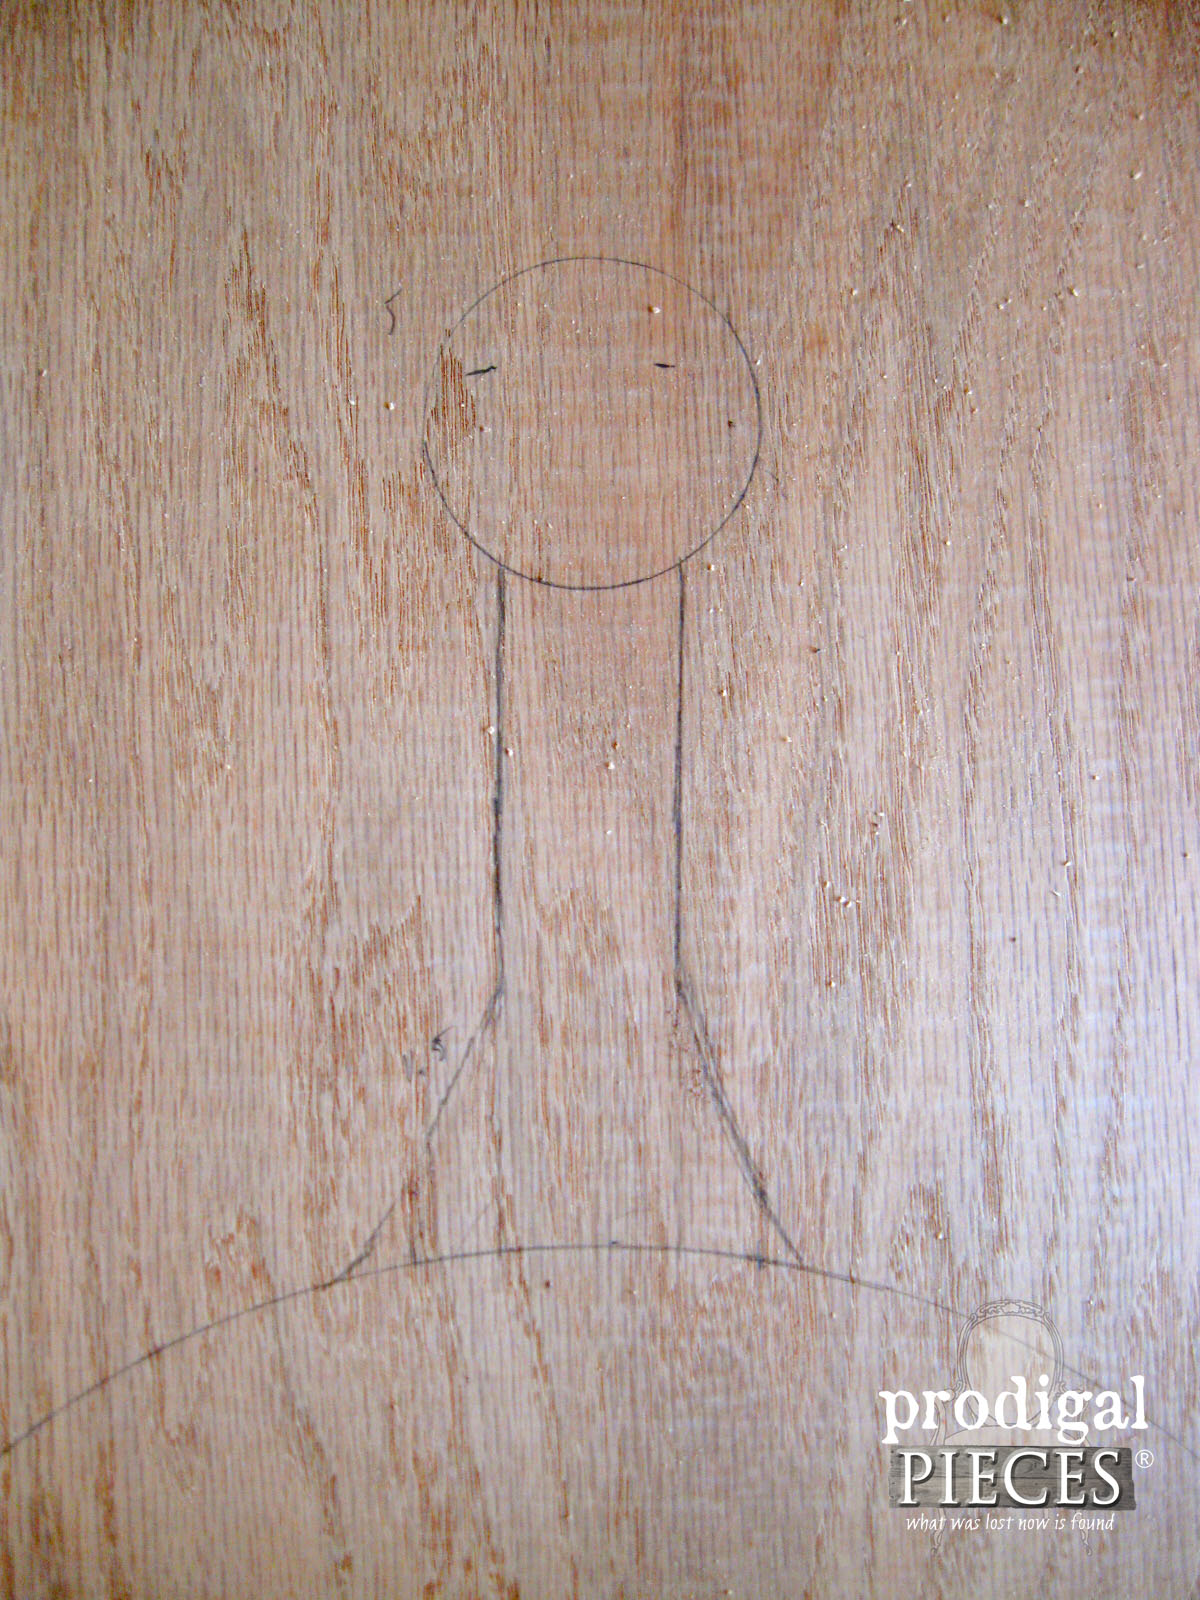 Pencil Drawing for DIY Cheese Board | Prodigal Pieces | www.prodigalpieces.com